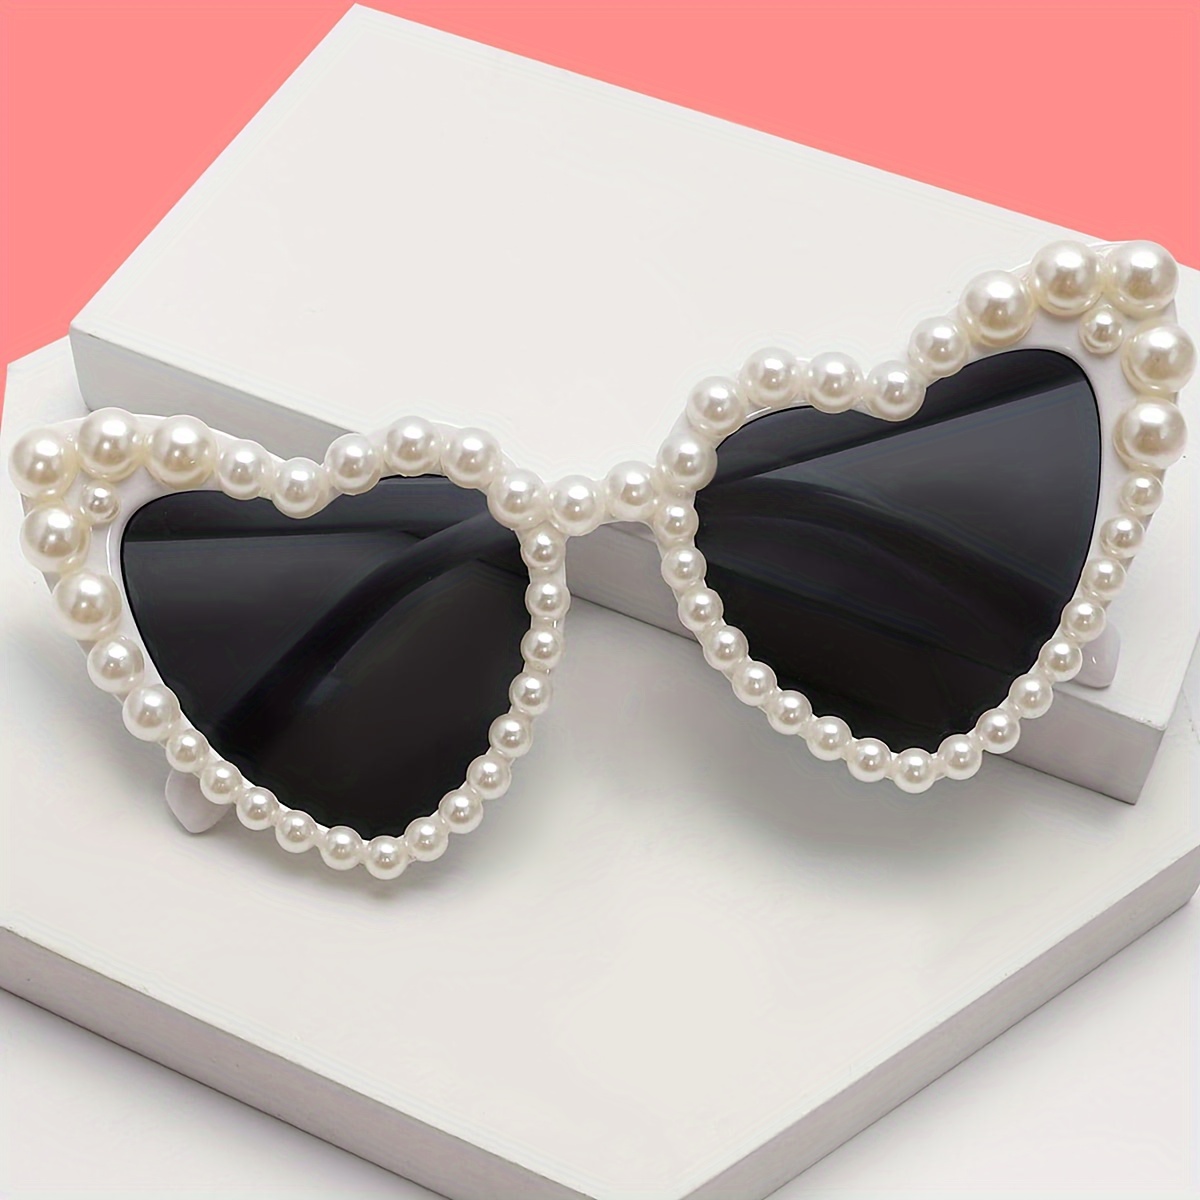 

Heart Shaped Fashion Glasses For Women Faux Pearl Decor Candy Color Cute Sun Shades For Beach Party Prom For Music Festival